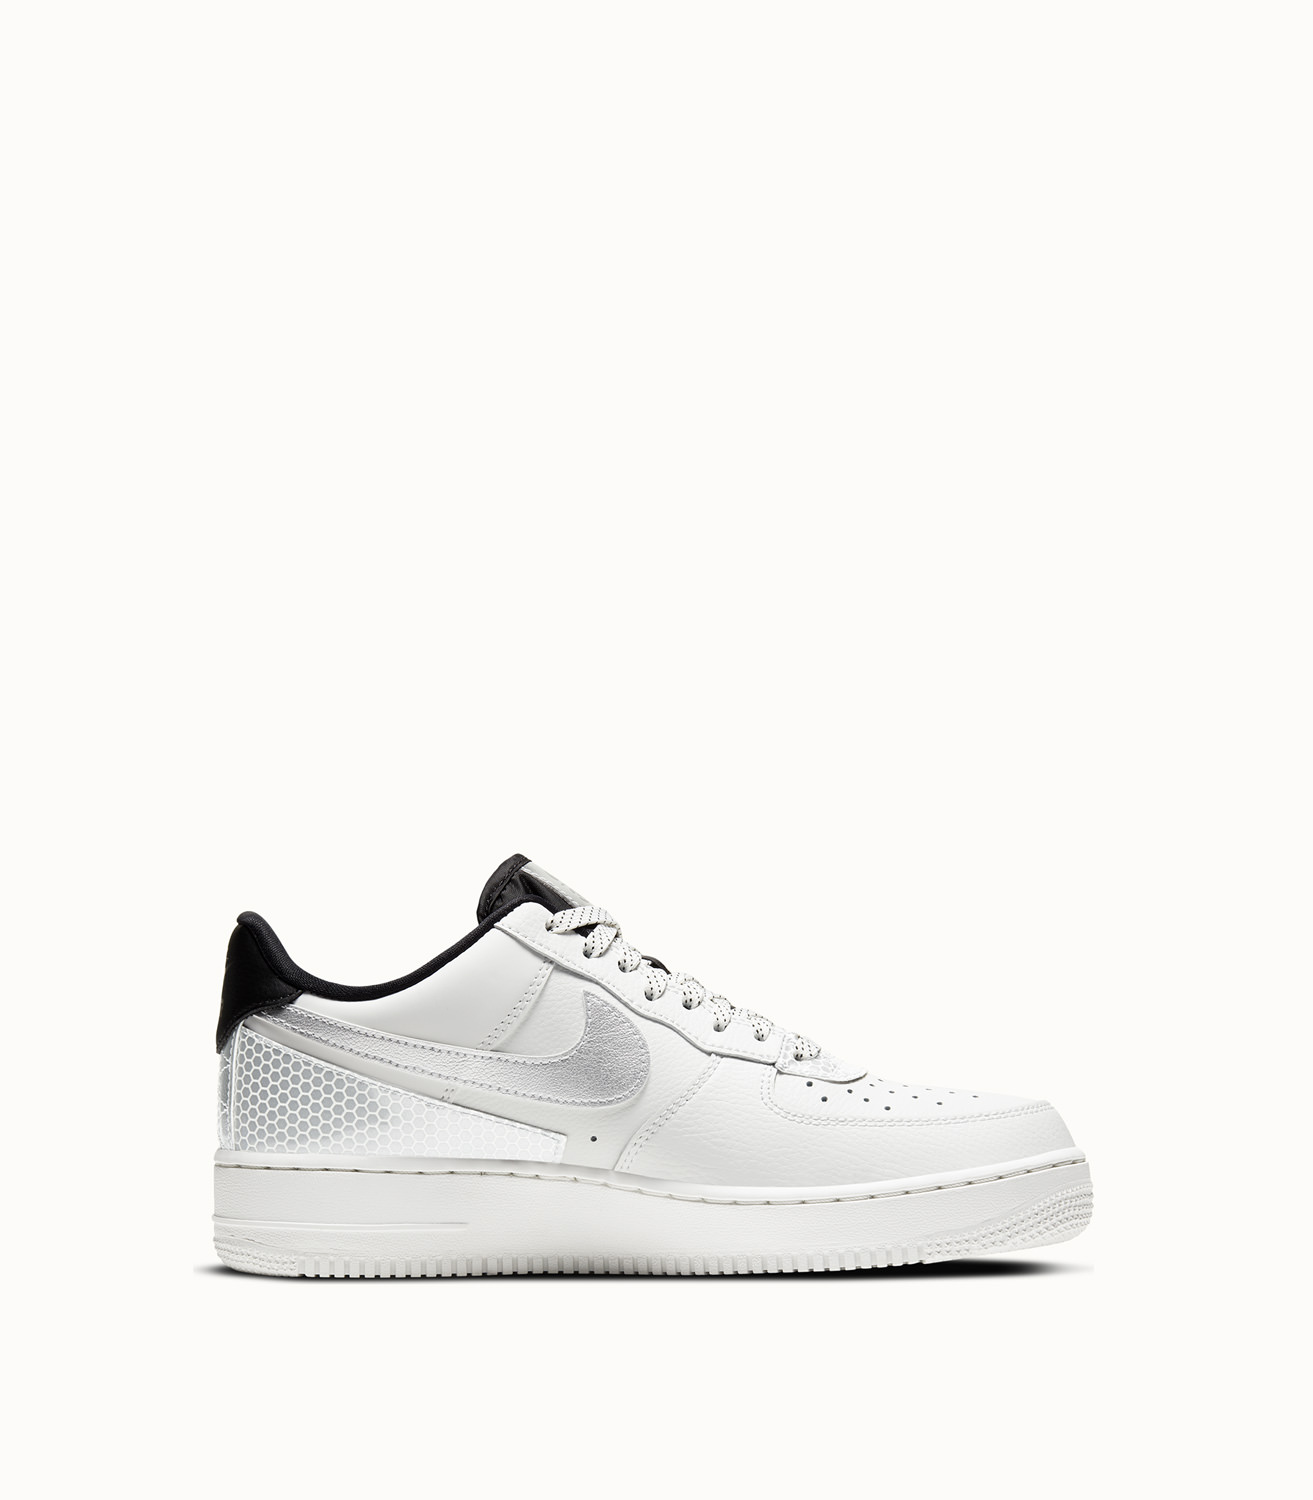 NIKE AIR FORCE 1 07 LV8 3M SNEAKERS COLOR WHITE | Playground